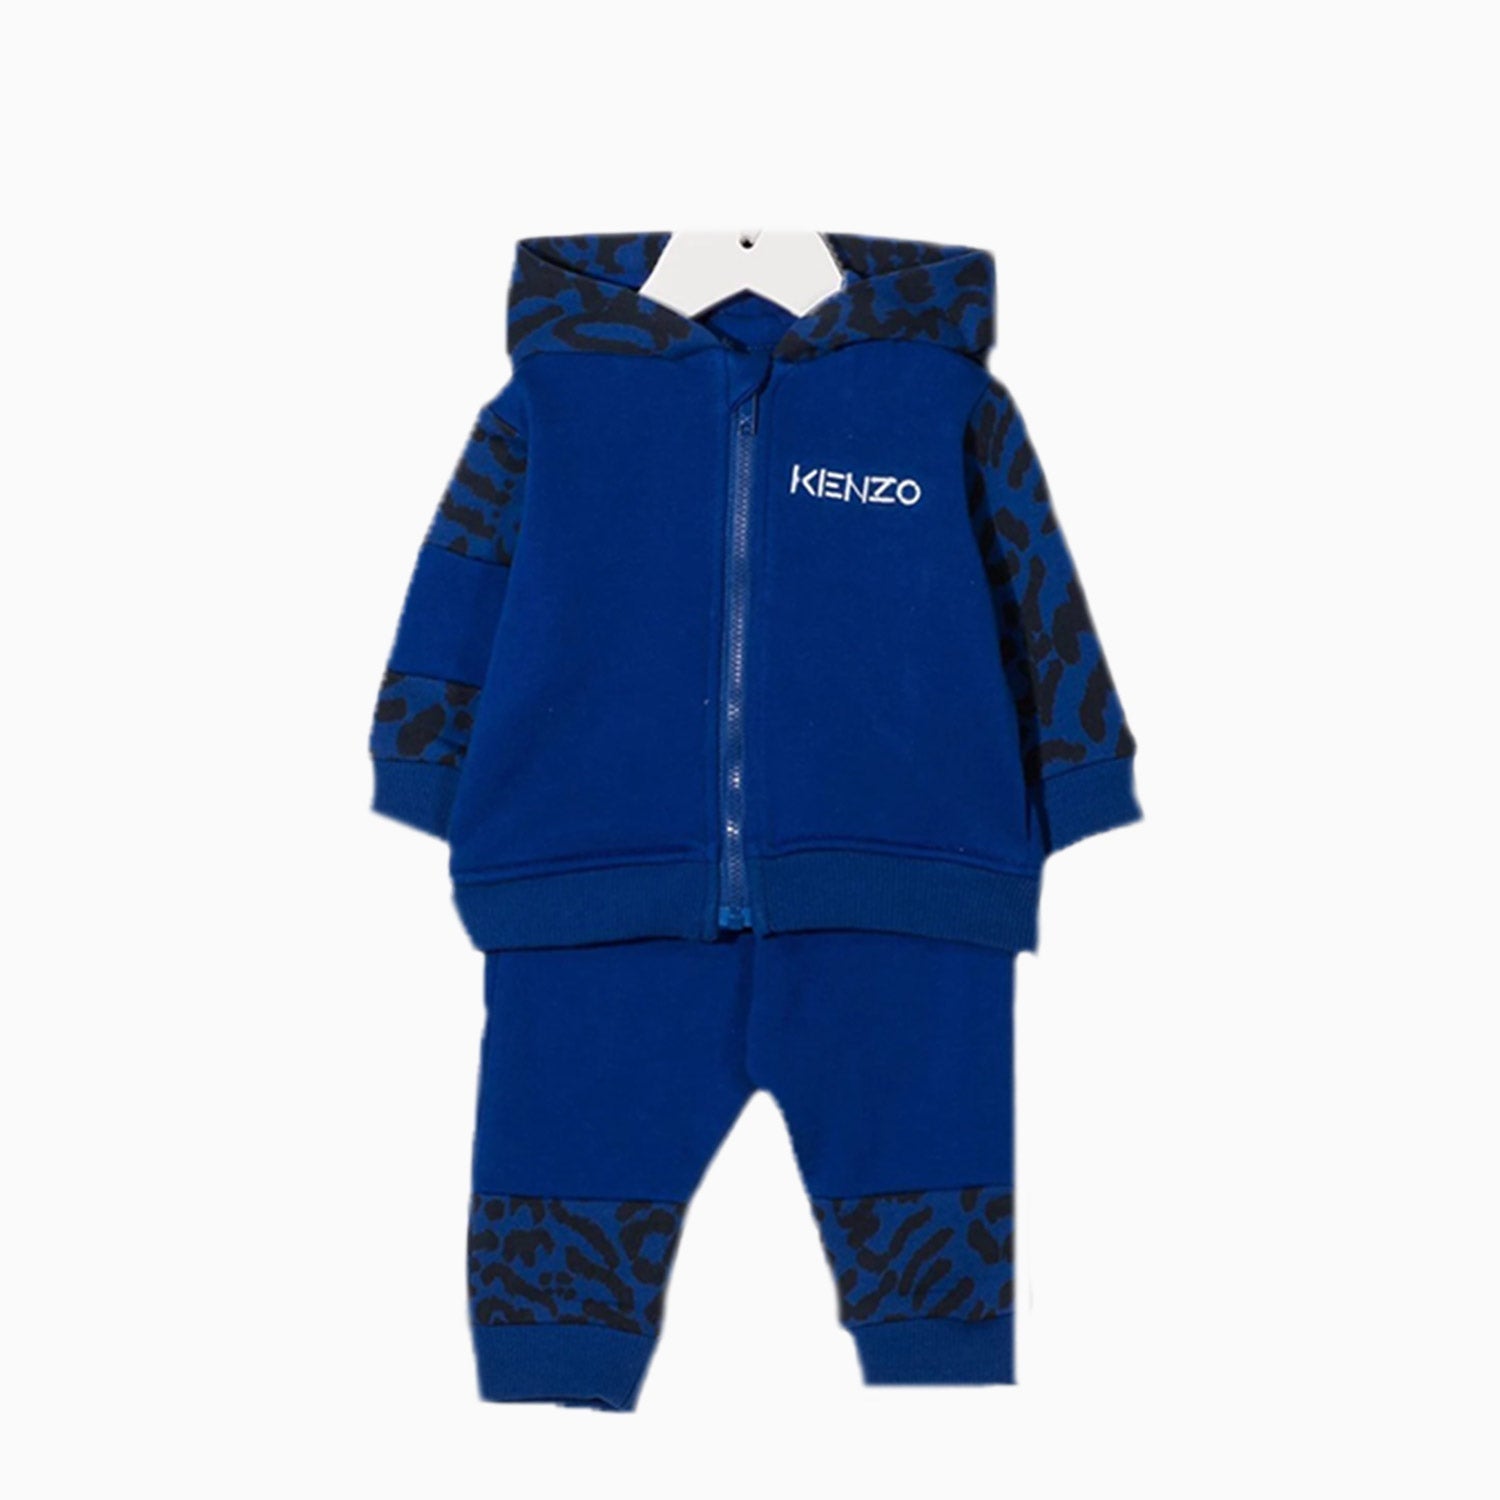 Kenzo Kid's Cardigan Hooded Tracksuit Toddlers - Color: Blue - Kids Premium Clothing -